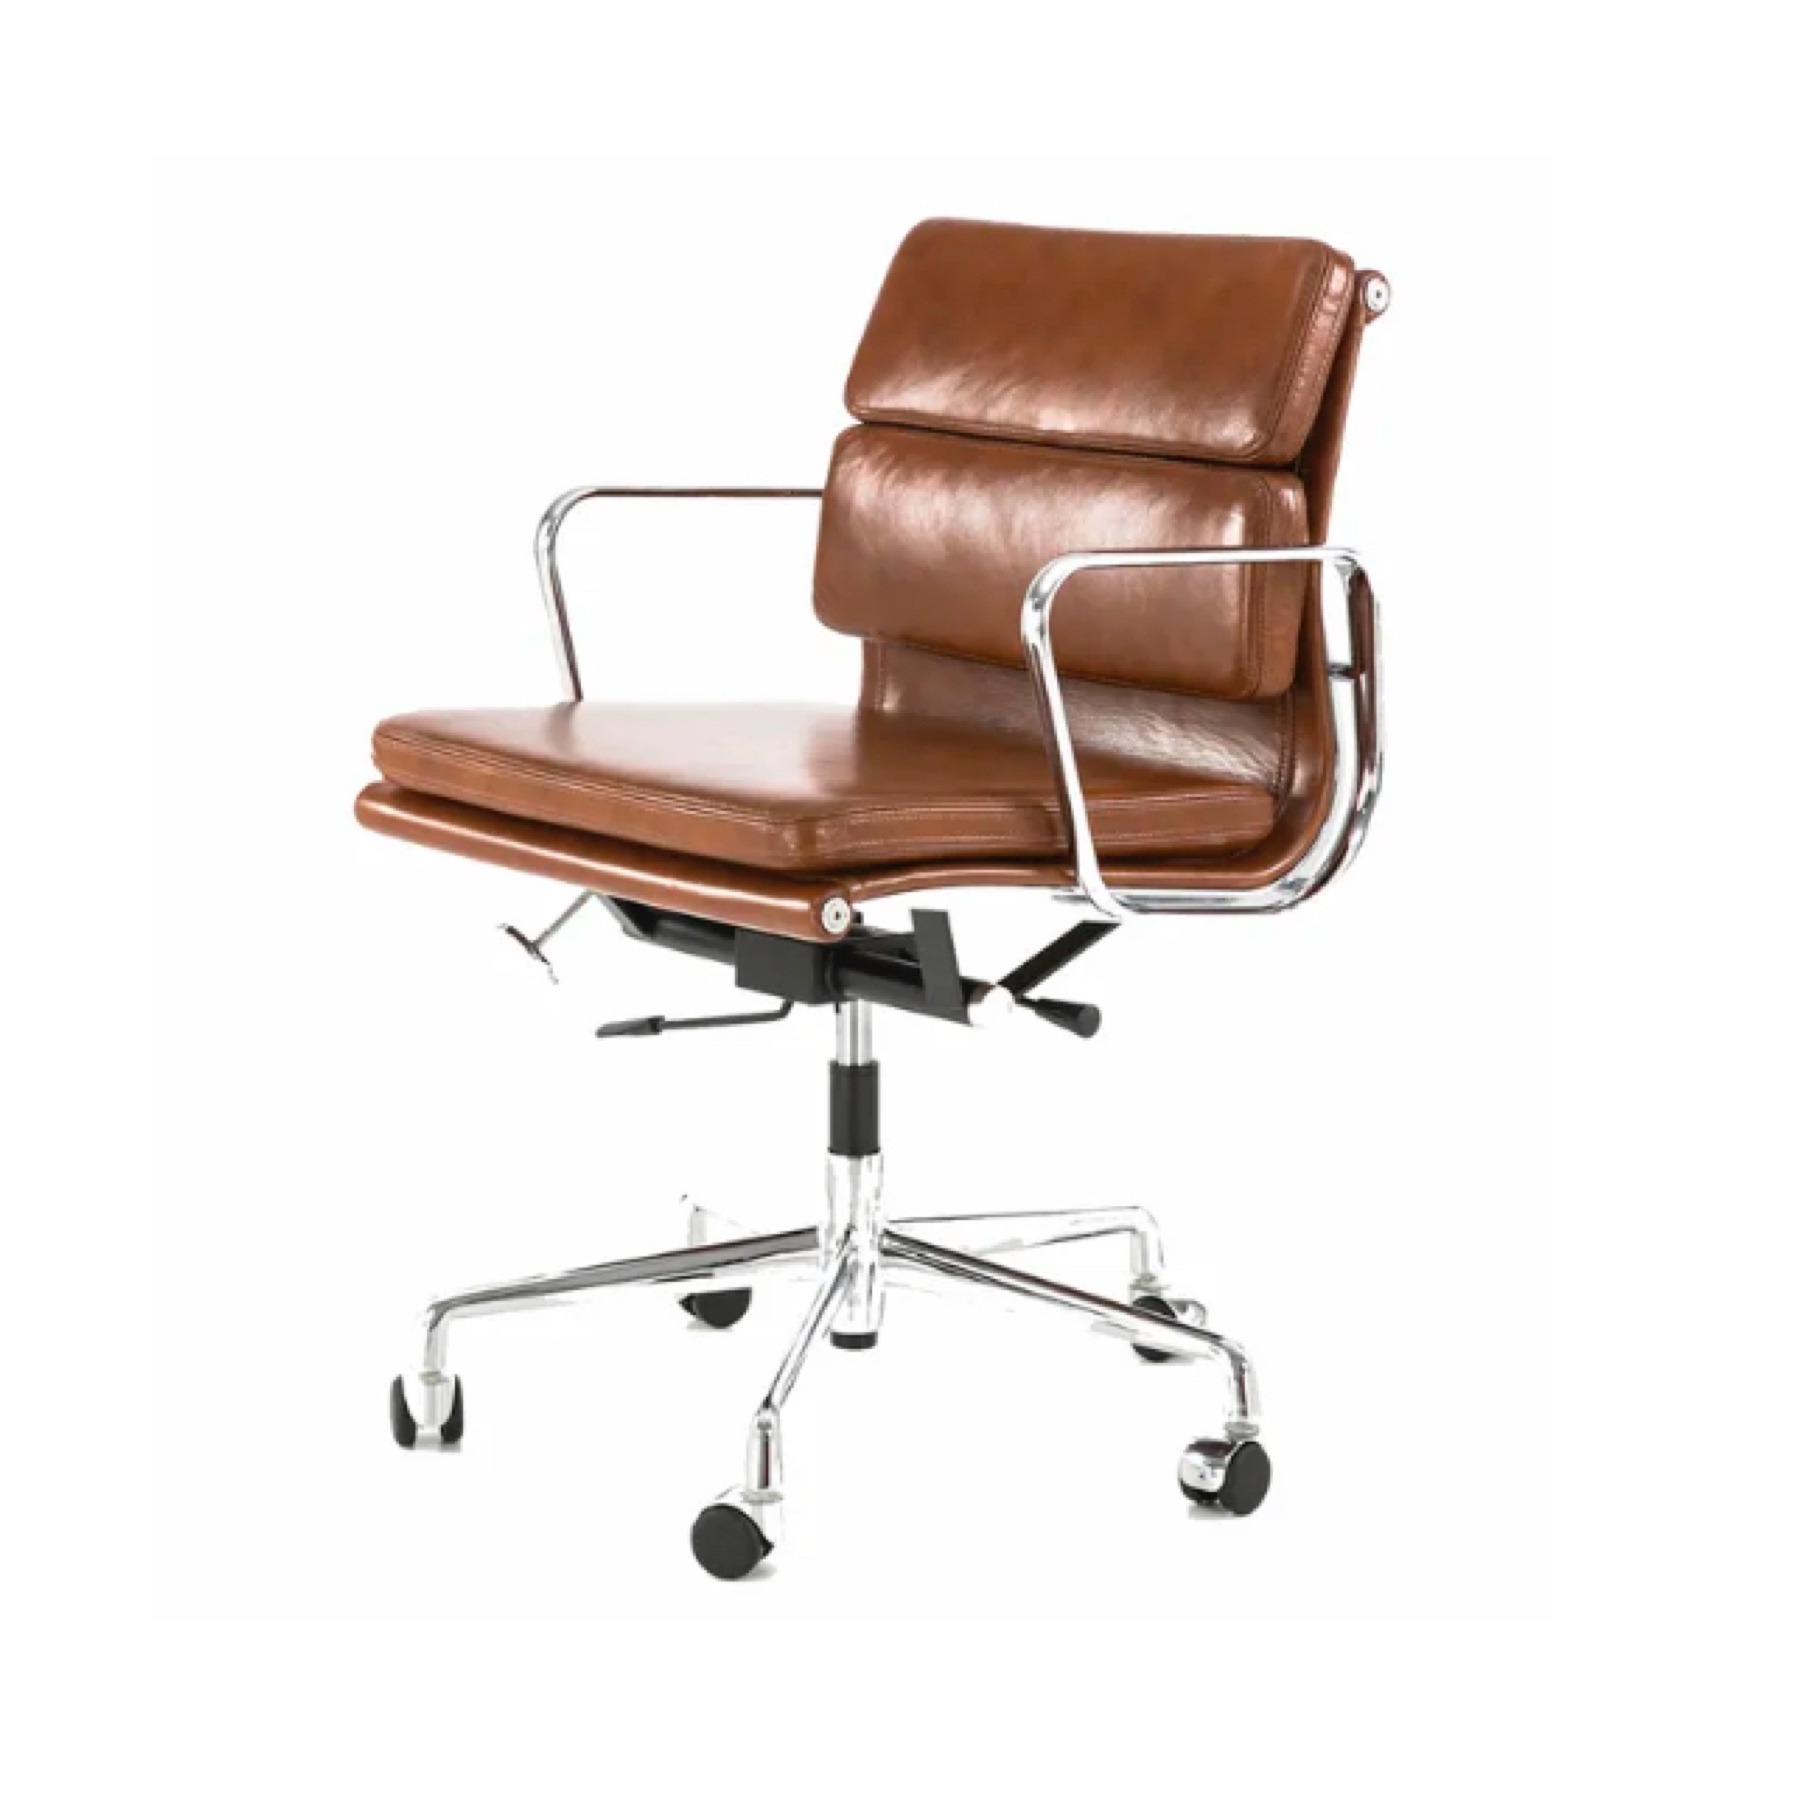 C-TR75004 Charles EA217 Softpad Low back Chair